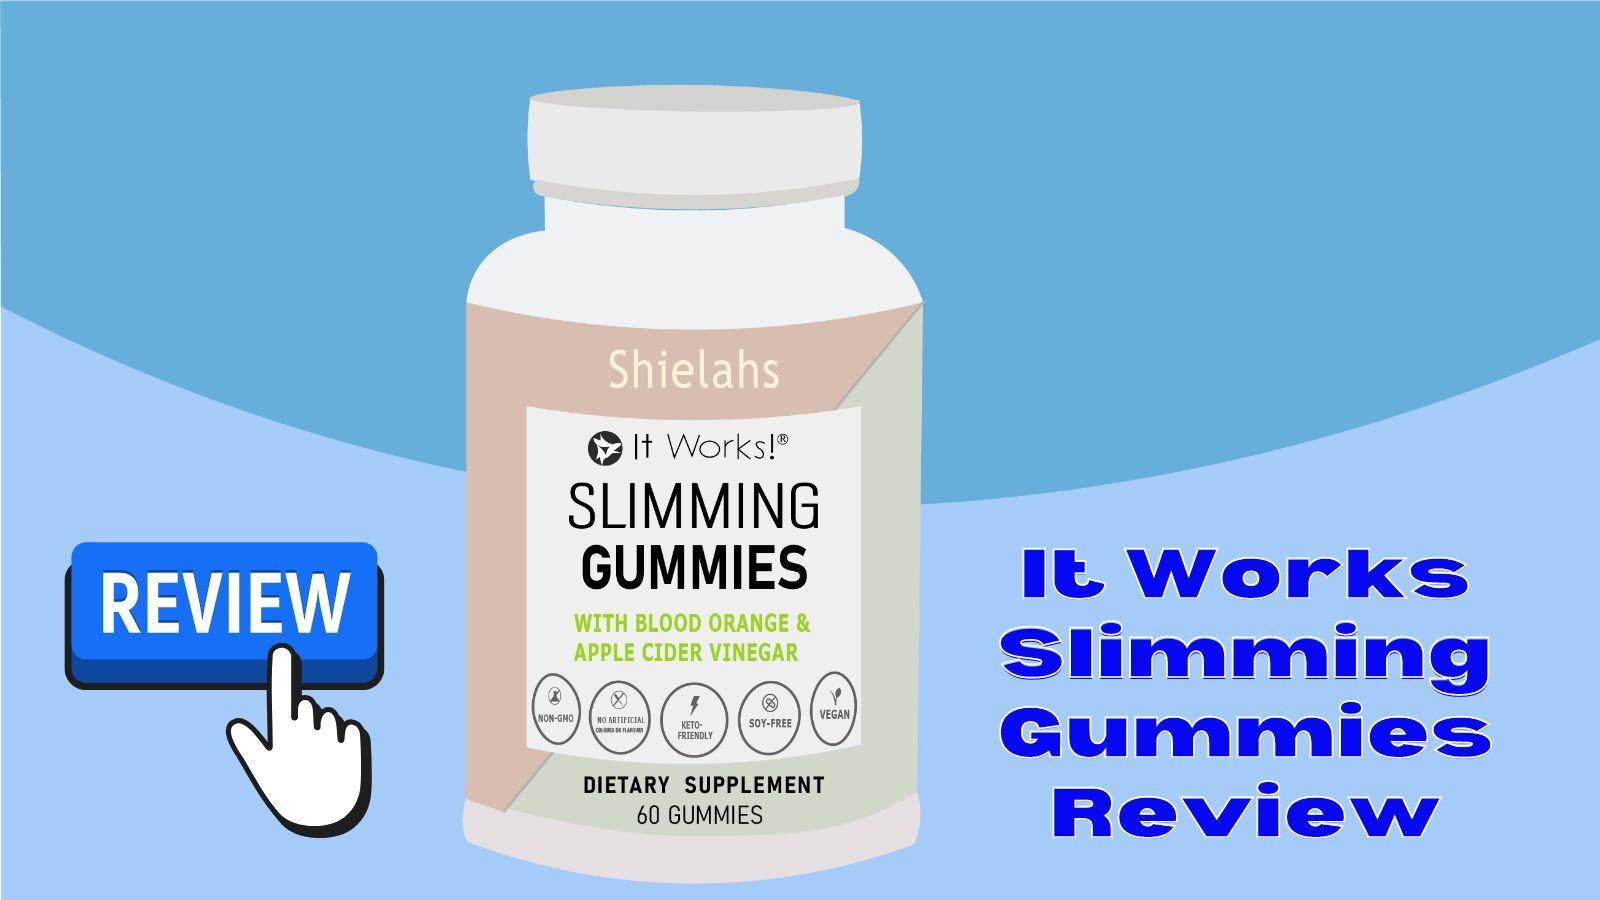 It Works Slimming Gummies Review: Does It Really Work?